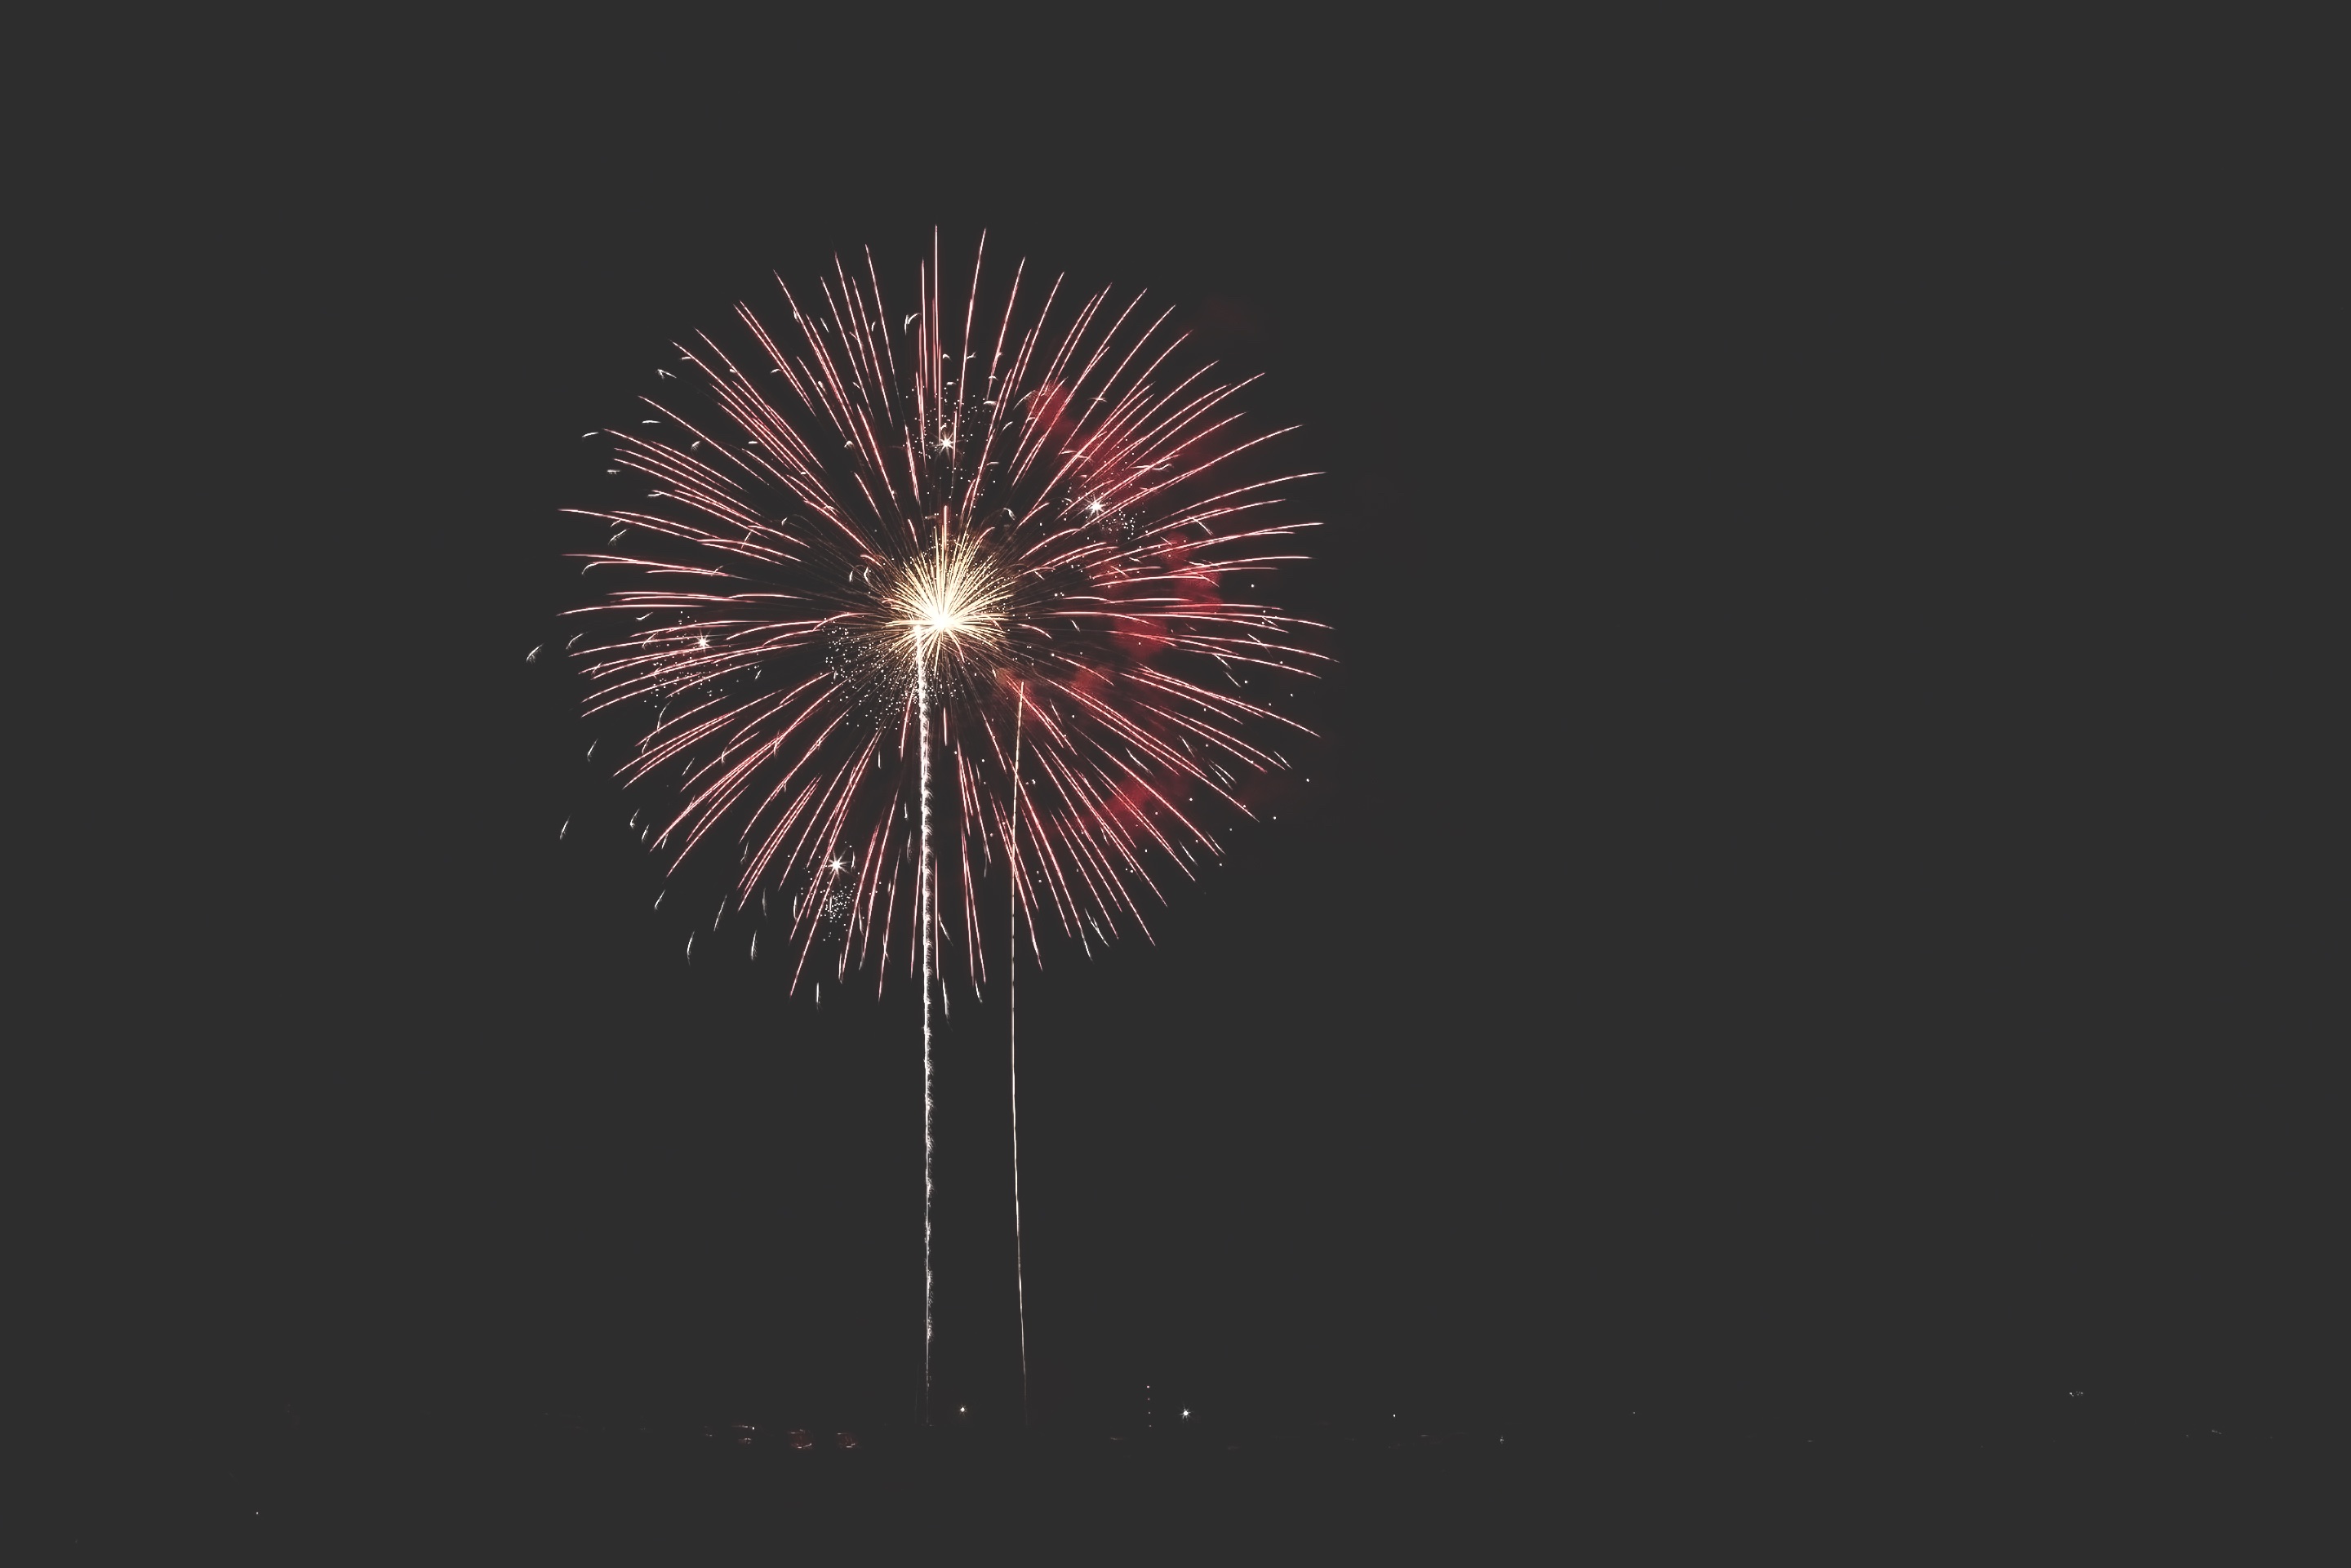 PC Wallpapers holidays, salute, holiday, fireworks, firework